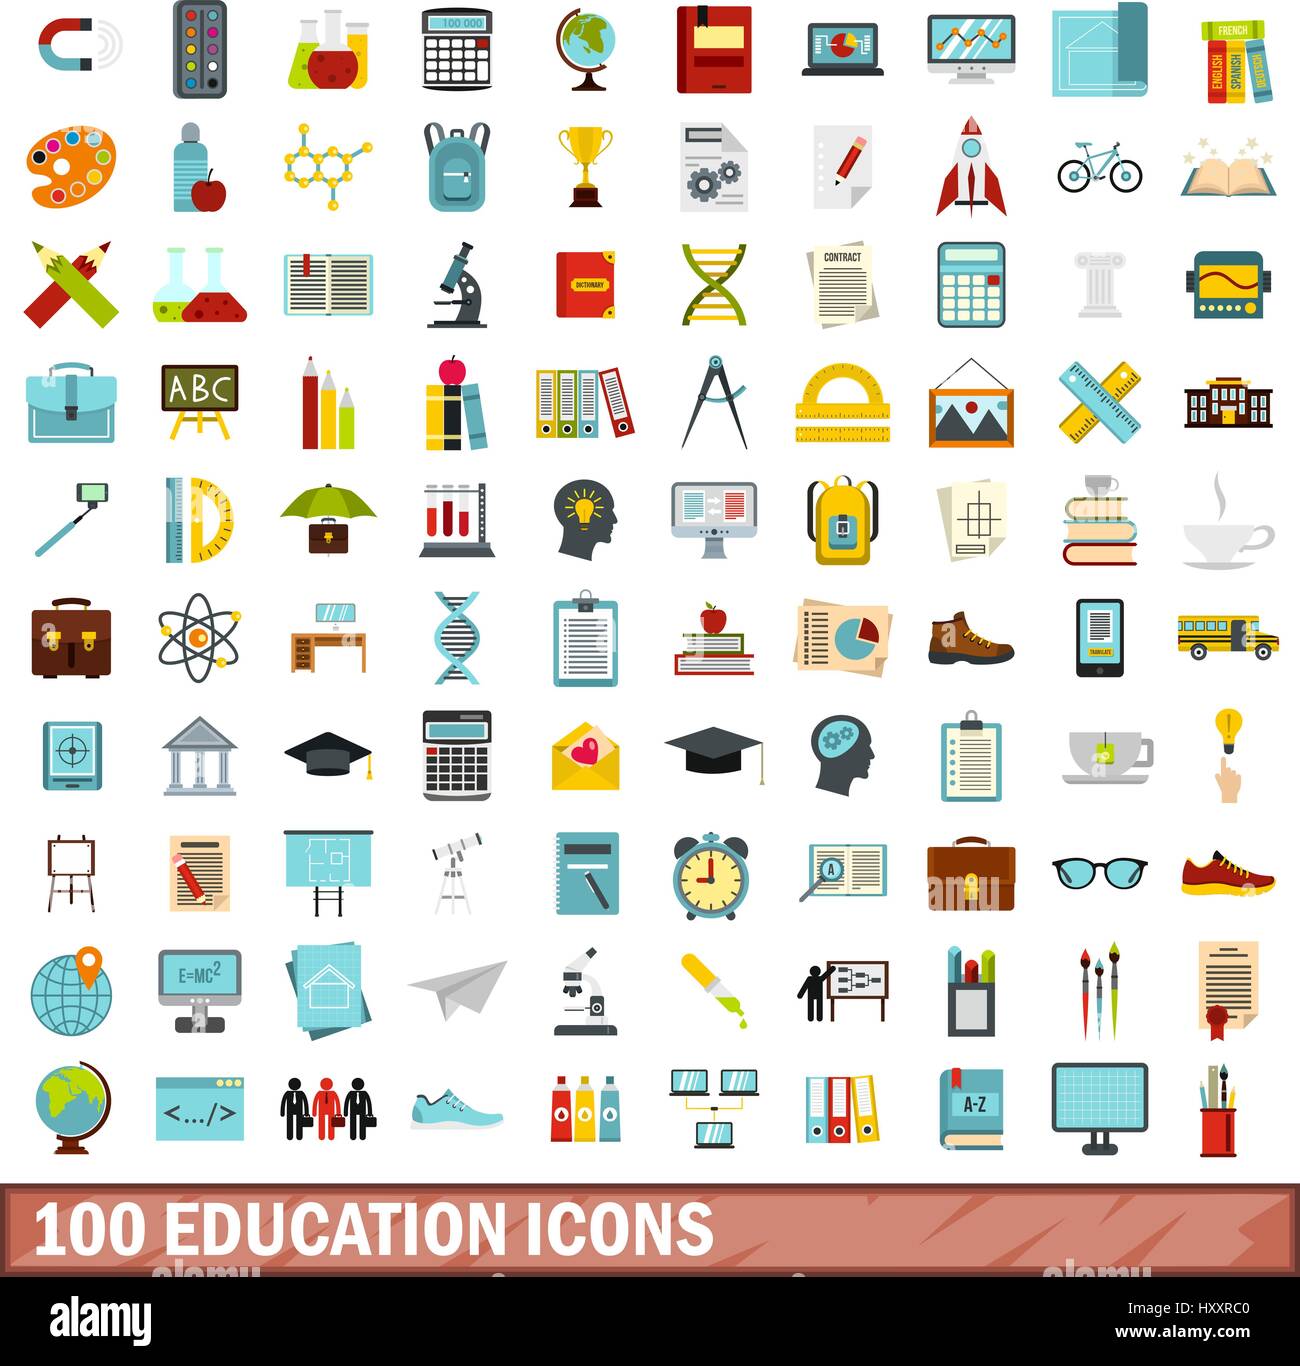 100 education icons set, flat style Stock Vector